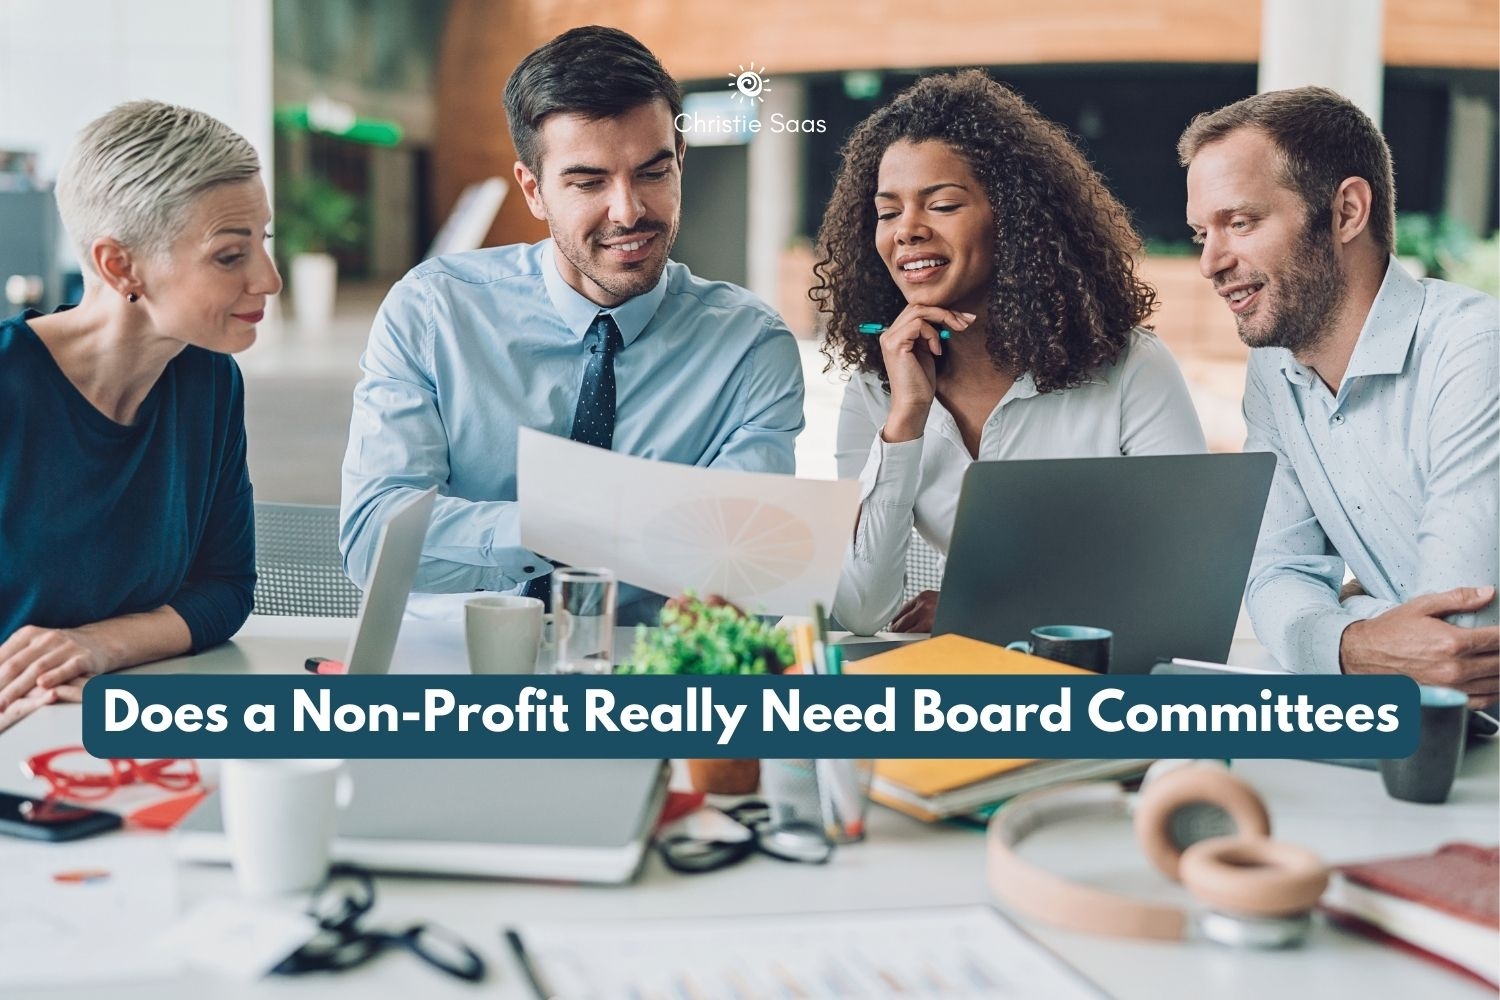 Does a Non-Profit Really Need Board Committees